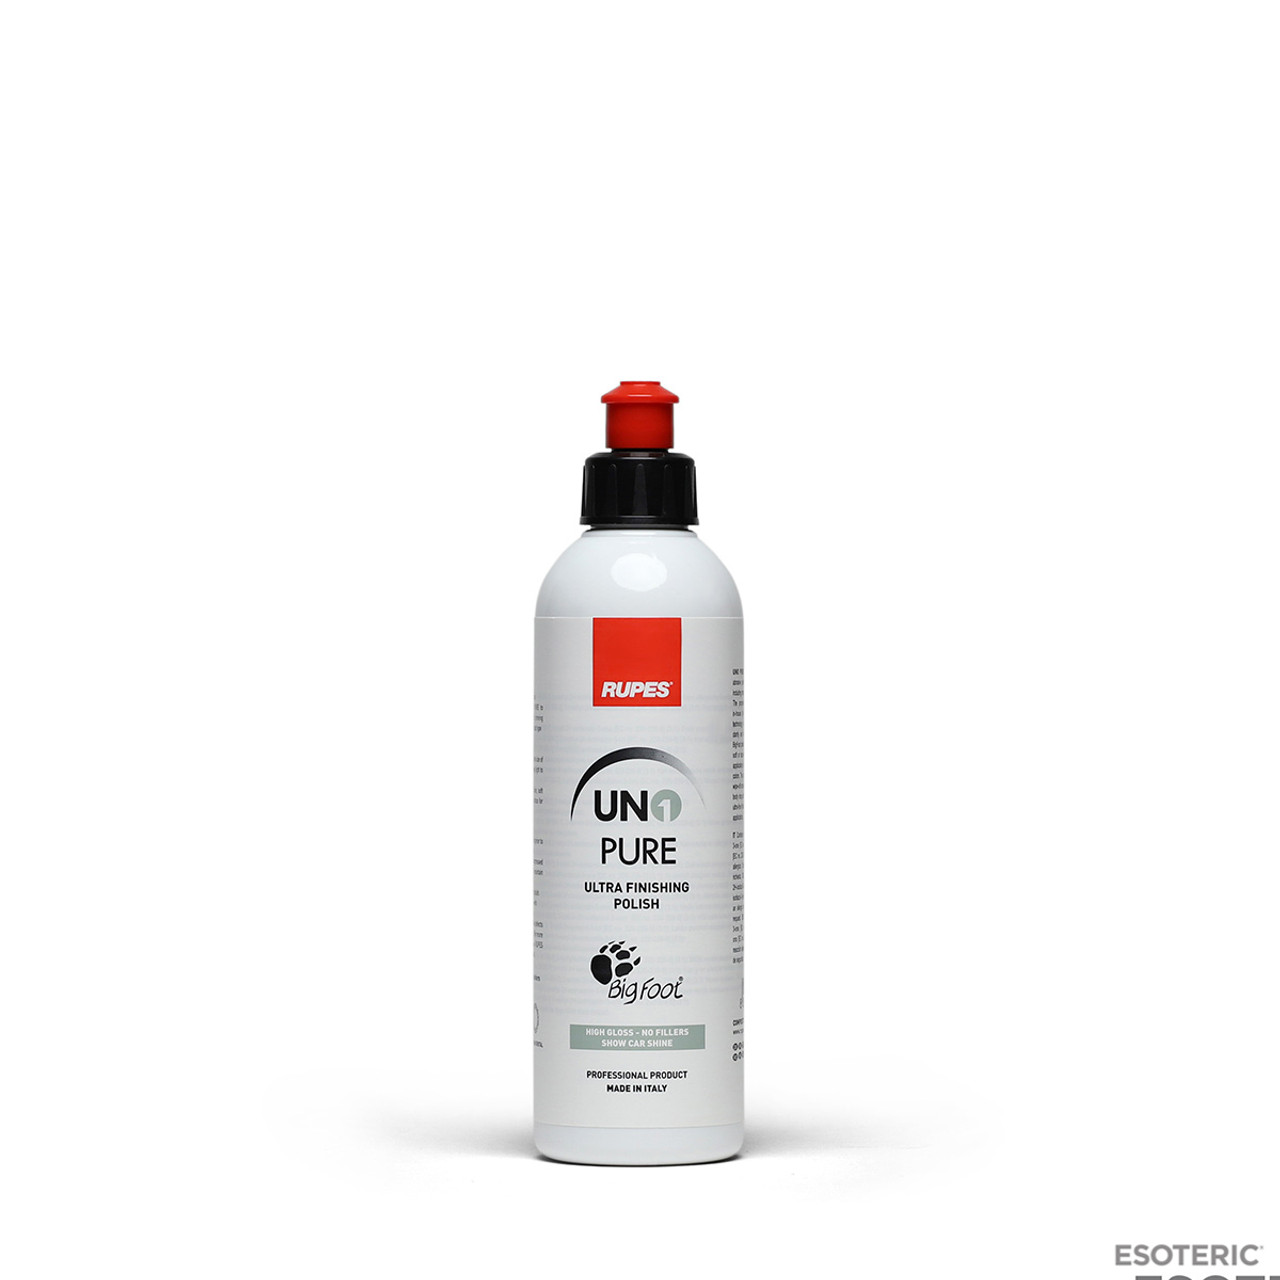 Obsessed Garage Rupes Mille Ultra-Fine Polishing Compound 1000ML.